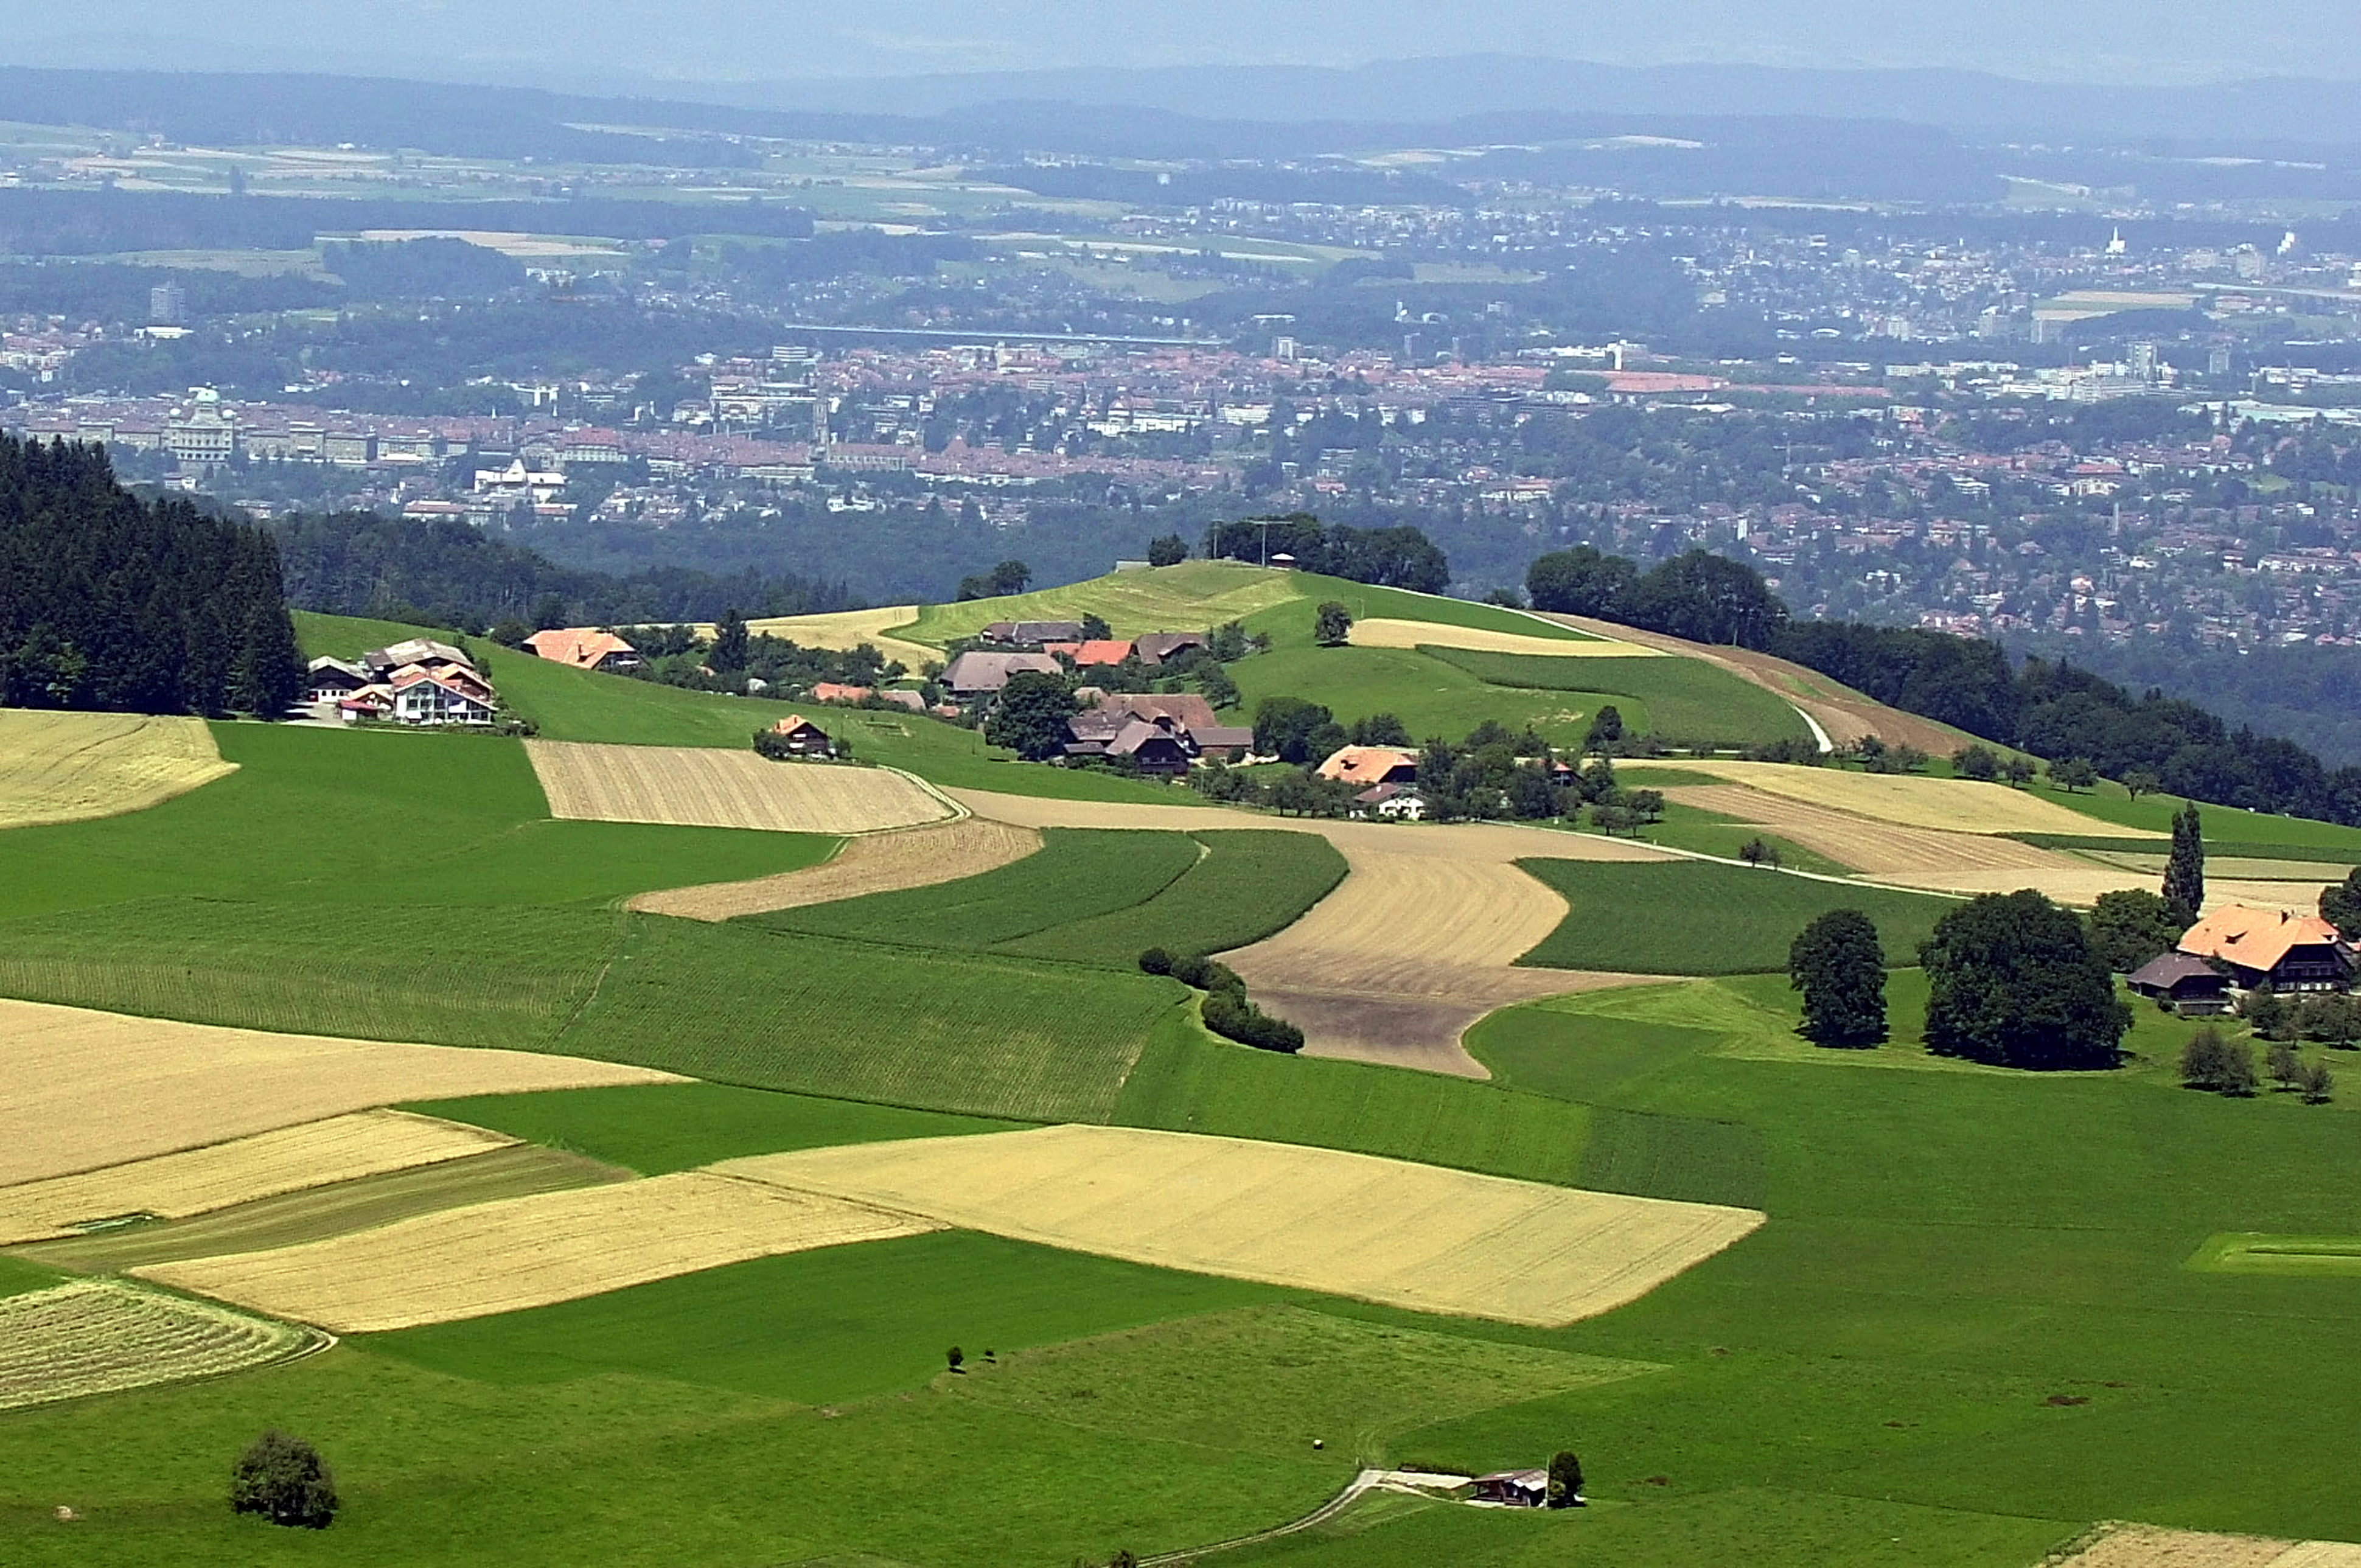 Englisberg - aerial view, northwestern direction - city of Bern in the background